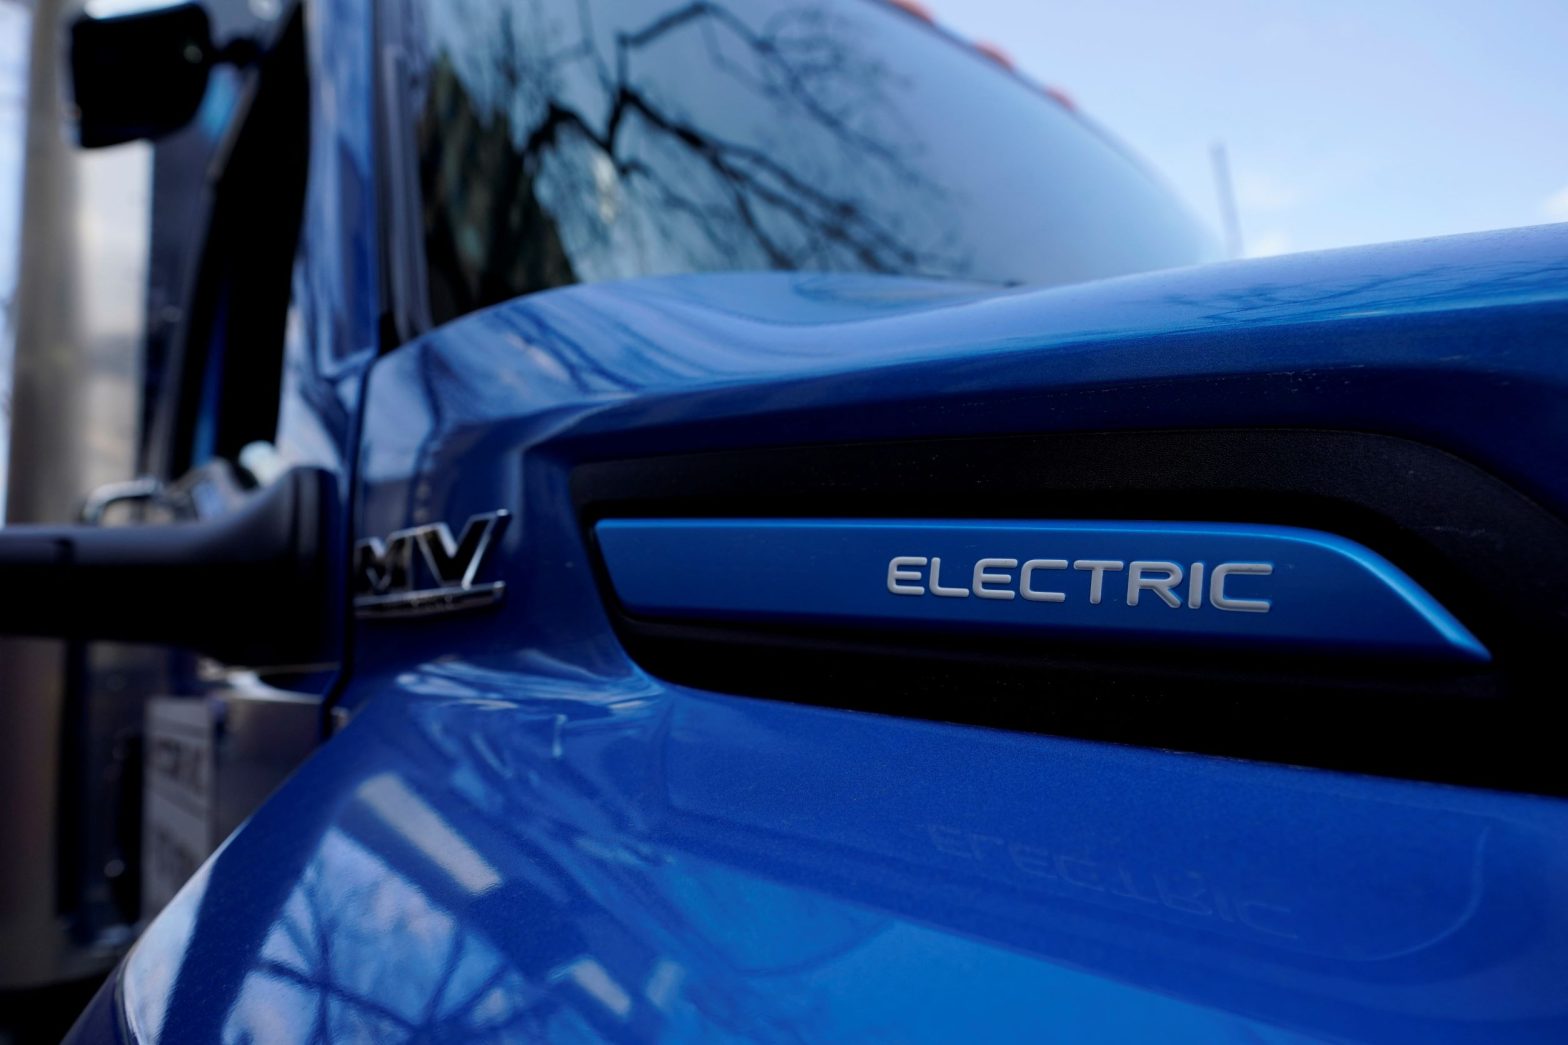 EPA Proposes Rules to Ensure Timely Electric Vehicle Transition The